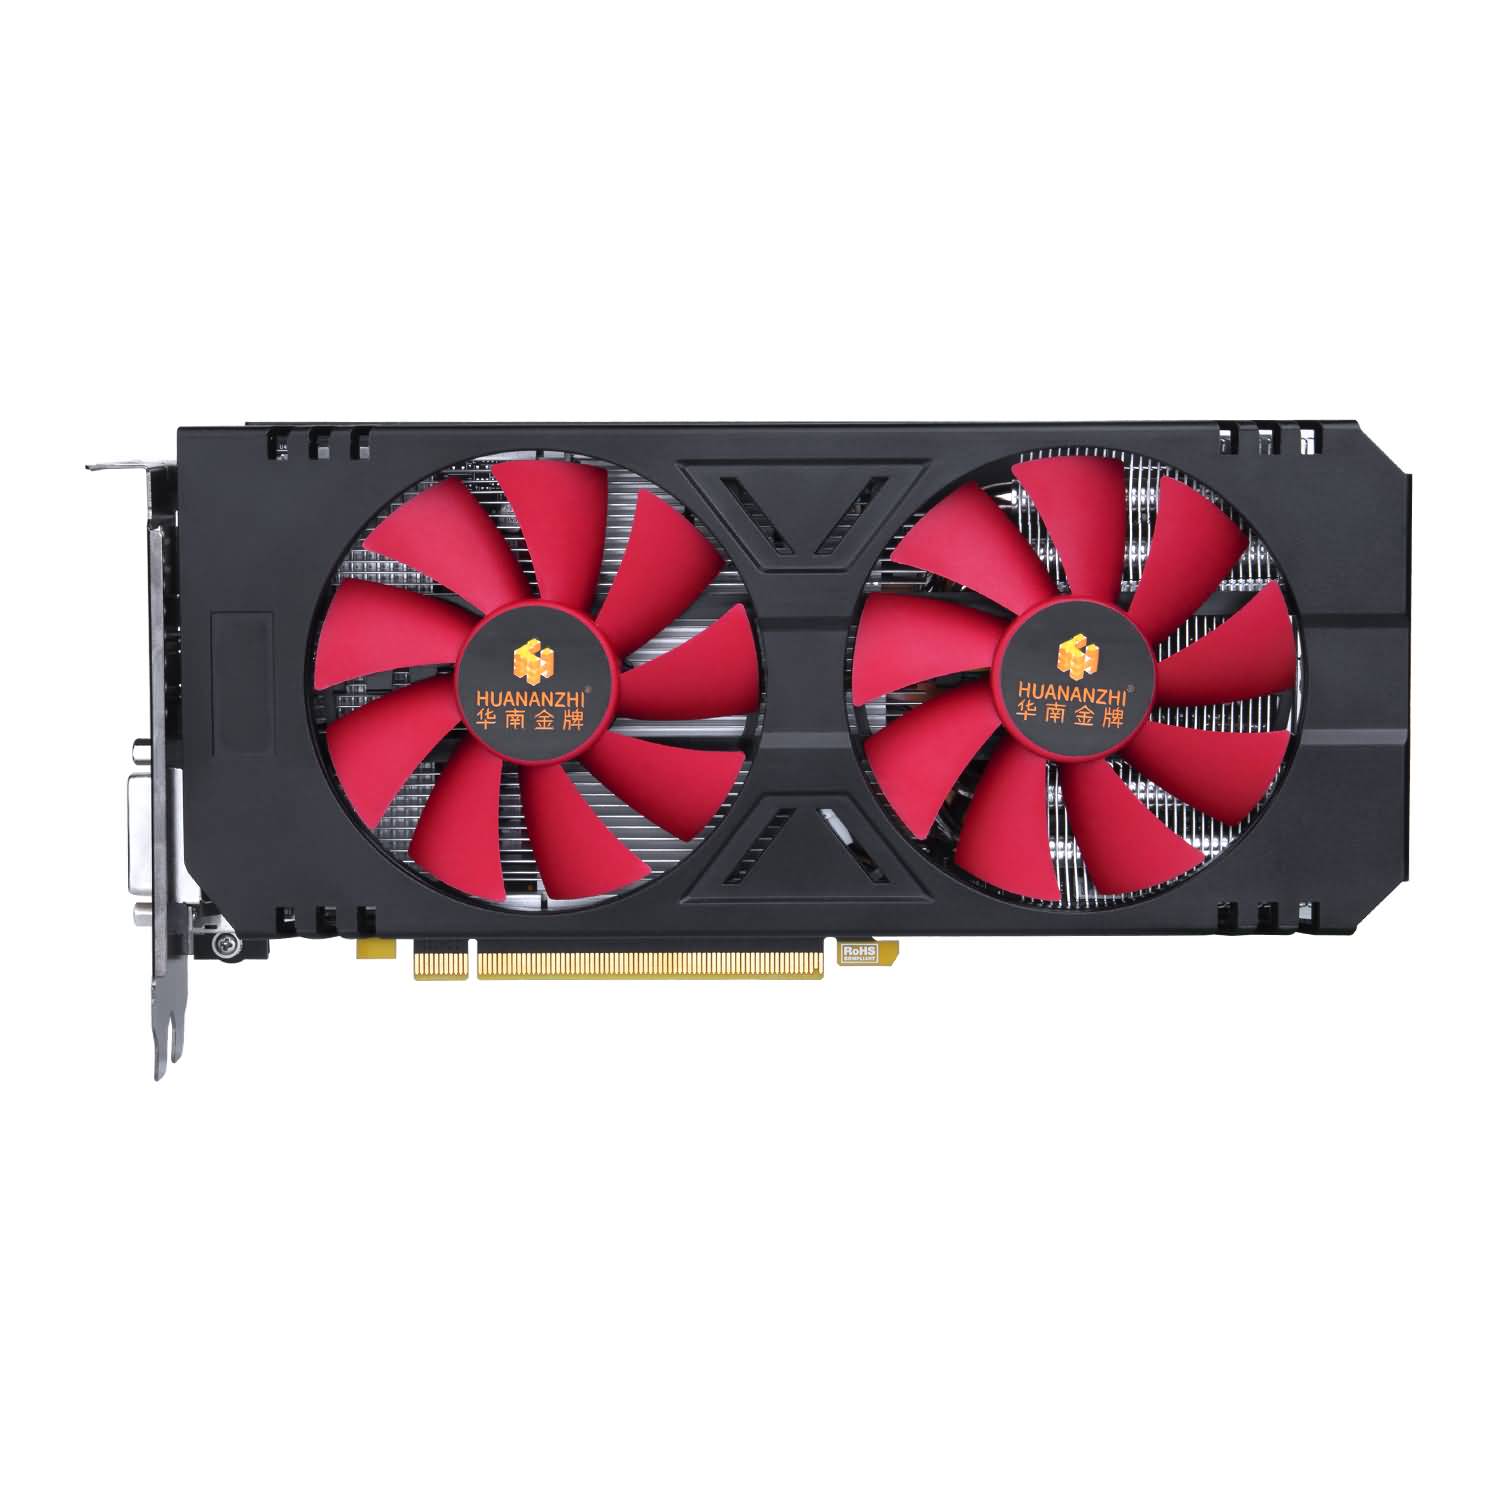 Download Huananzhi RX590 GME Graphics Card Free